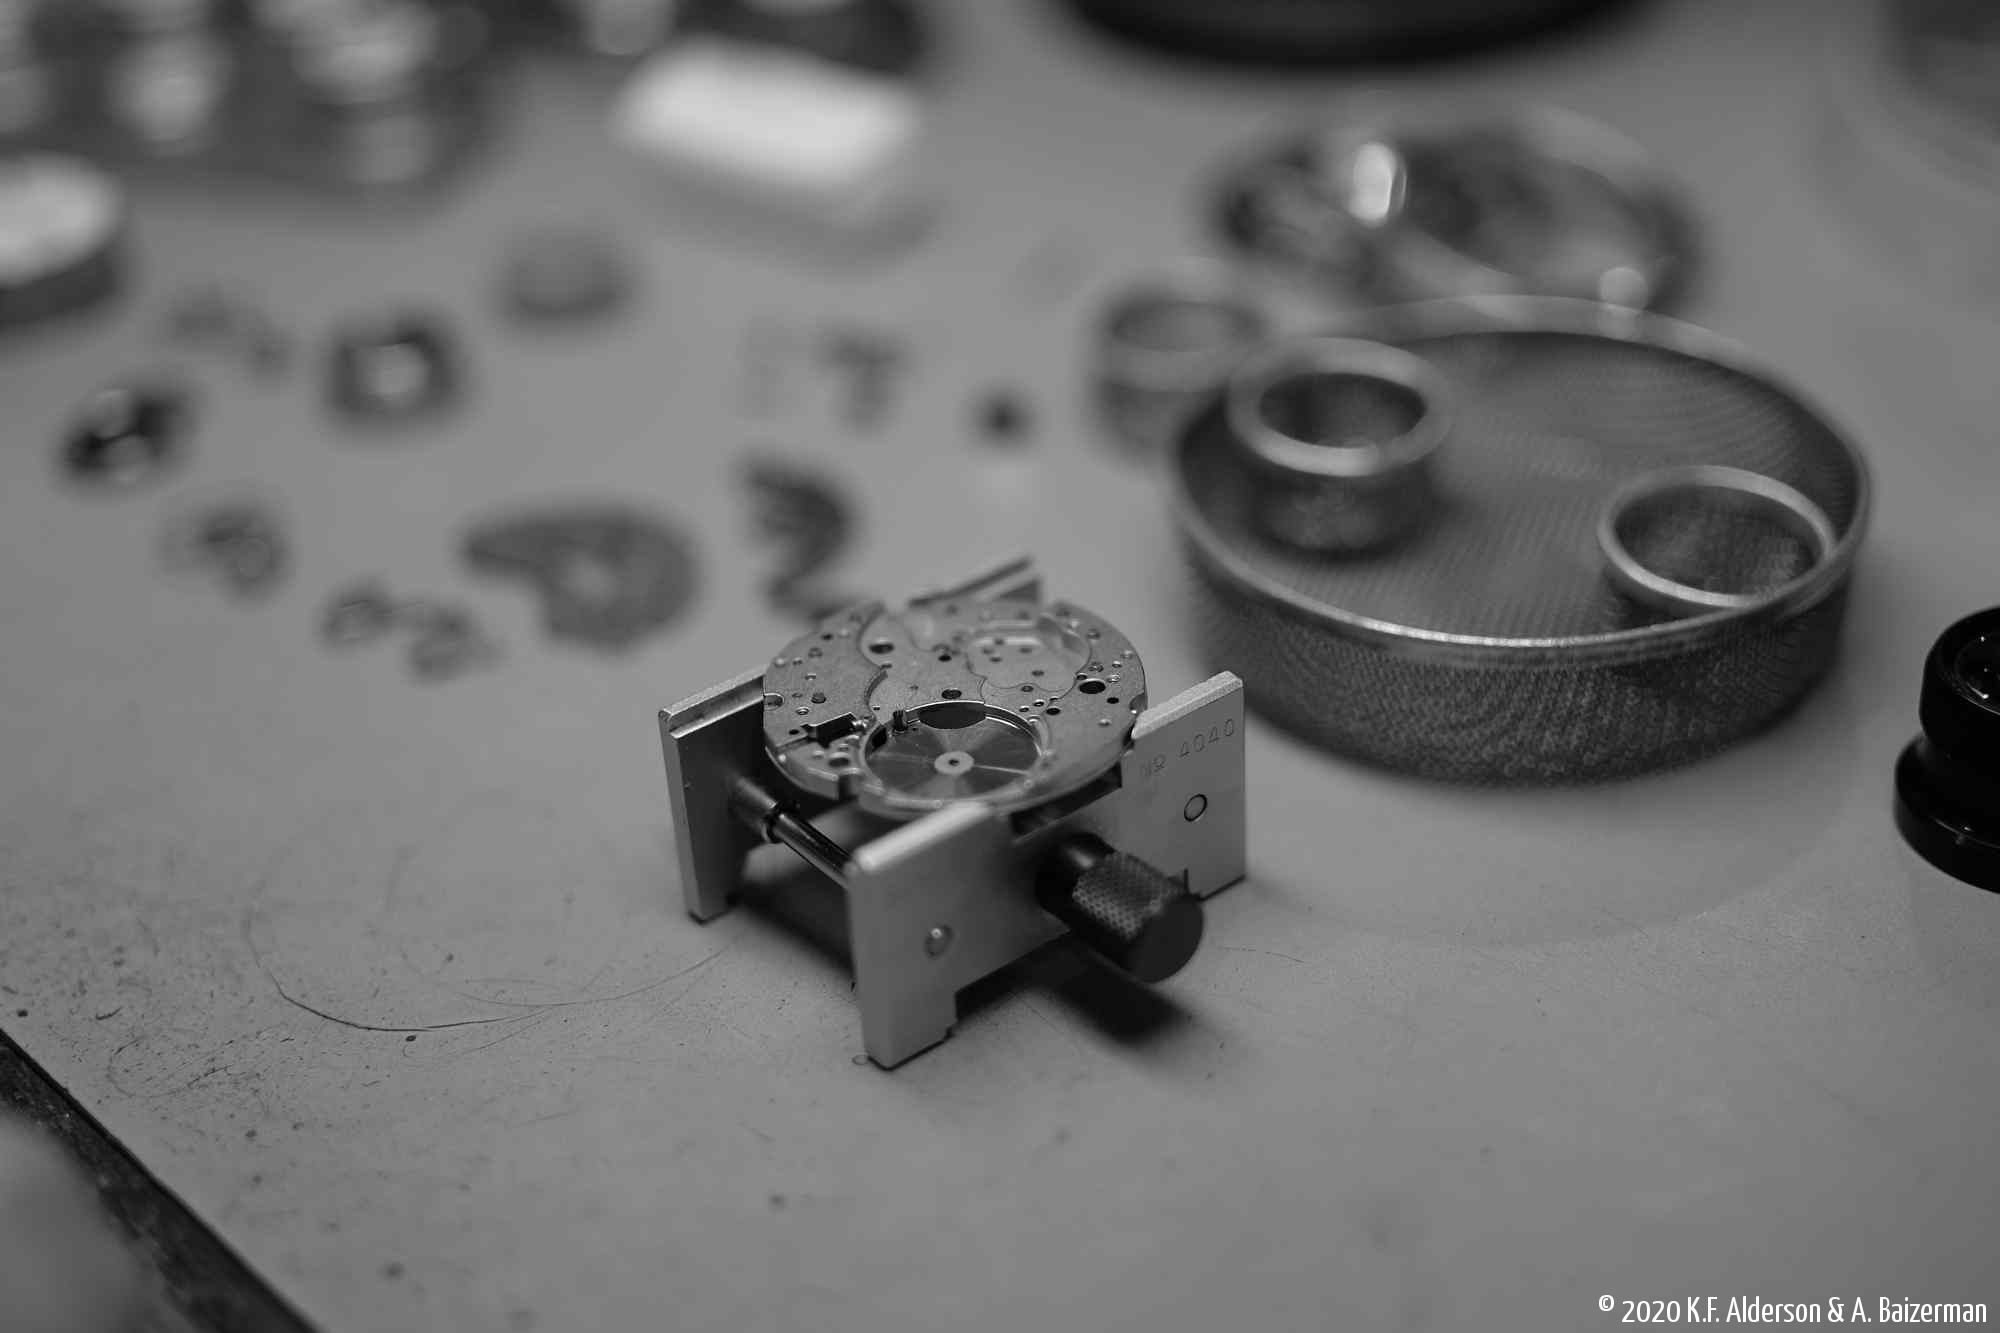 Chronograph movement in holder for inspection